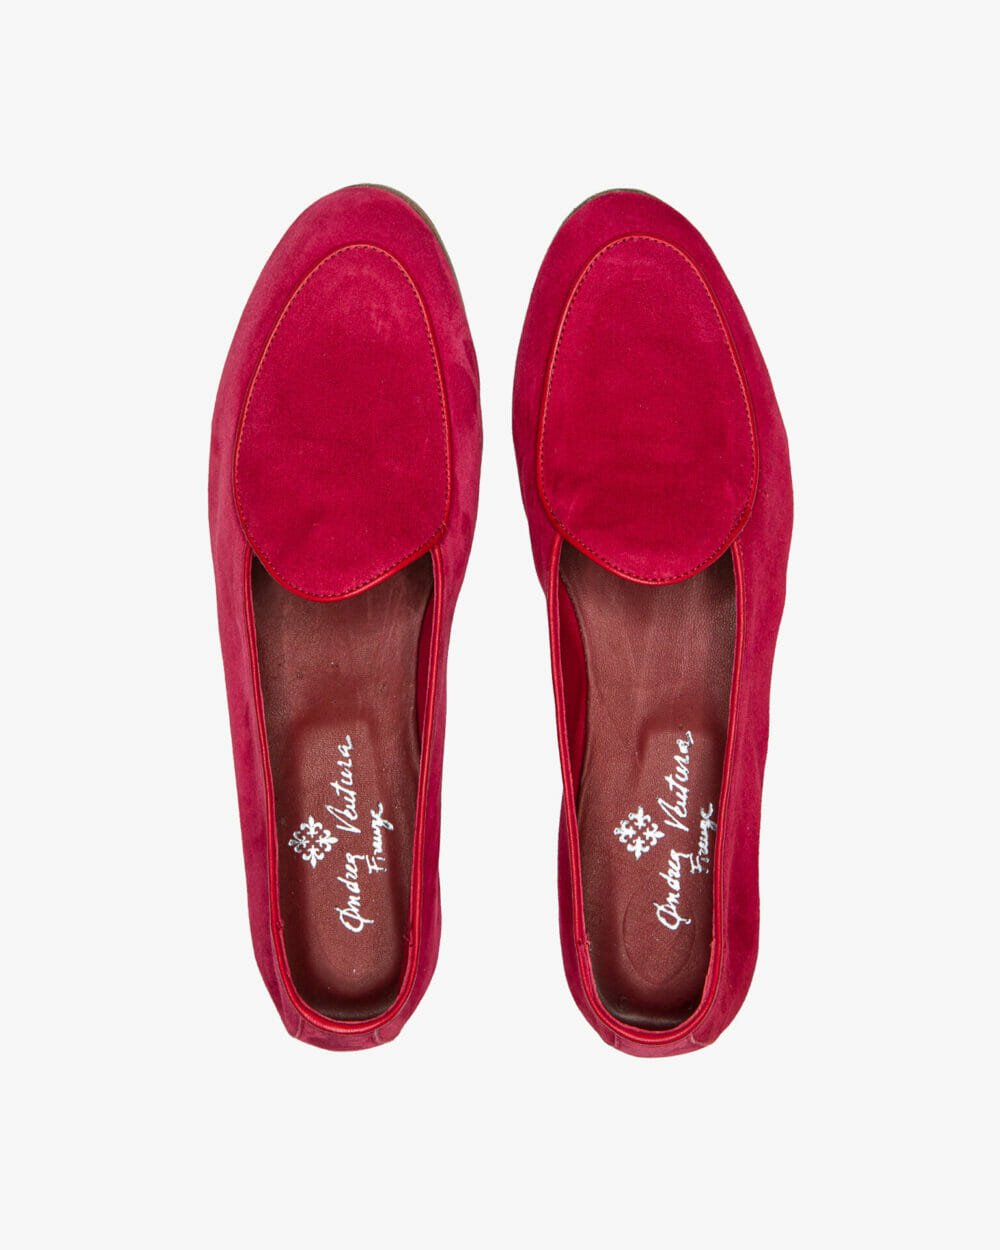 Belgian-d-ls-ruby-red-suede-from-above